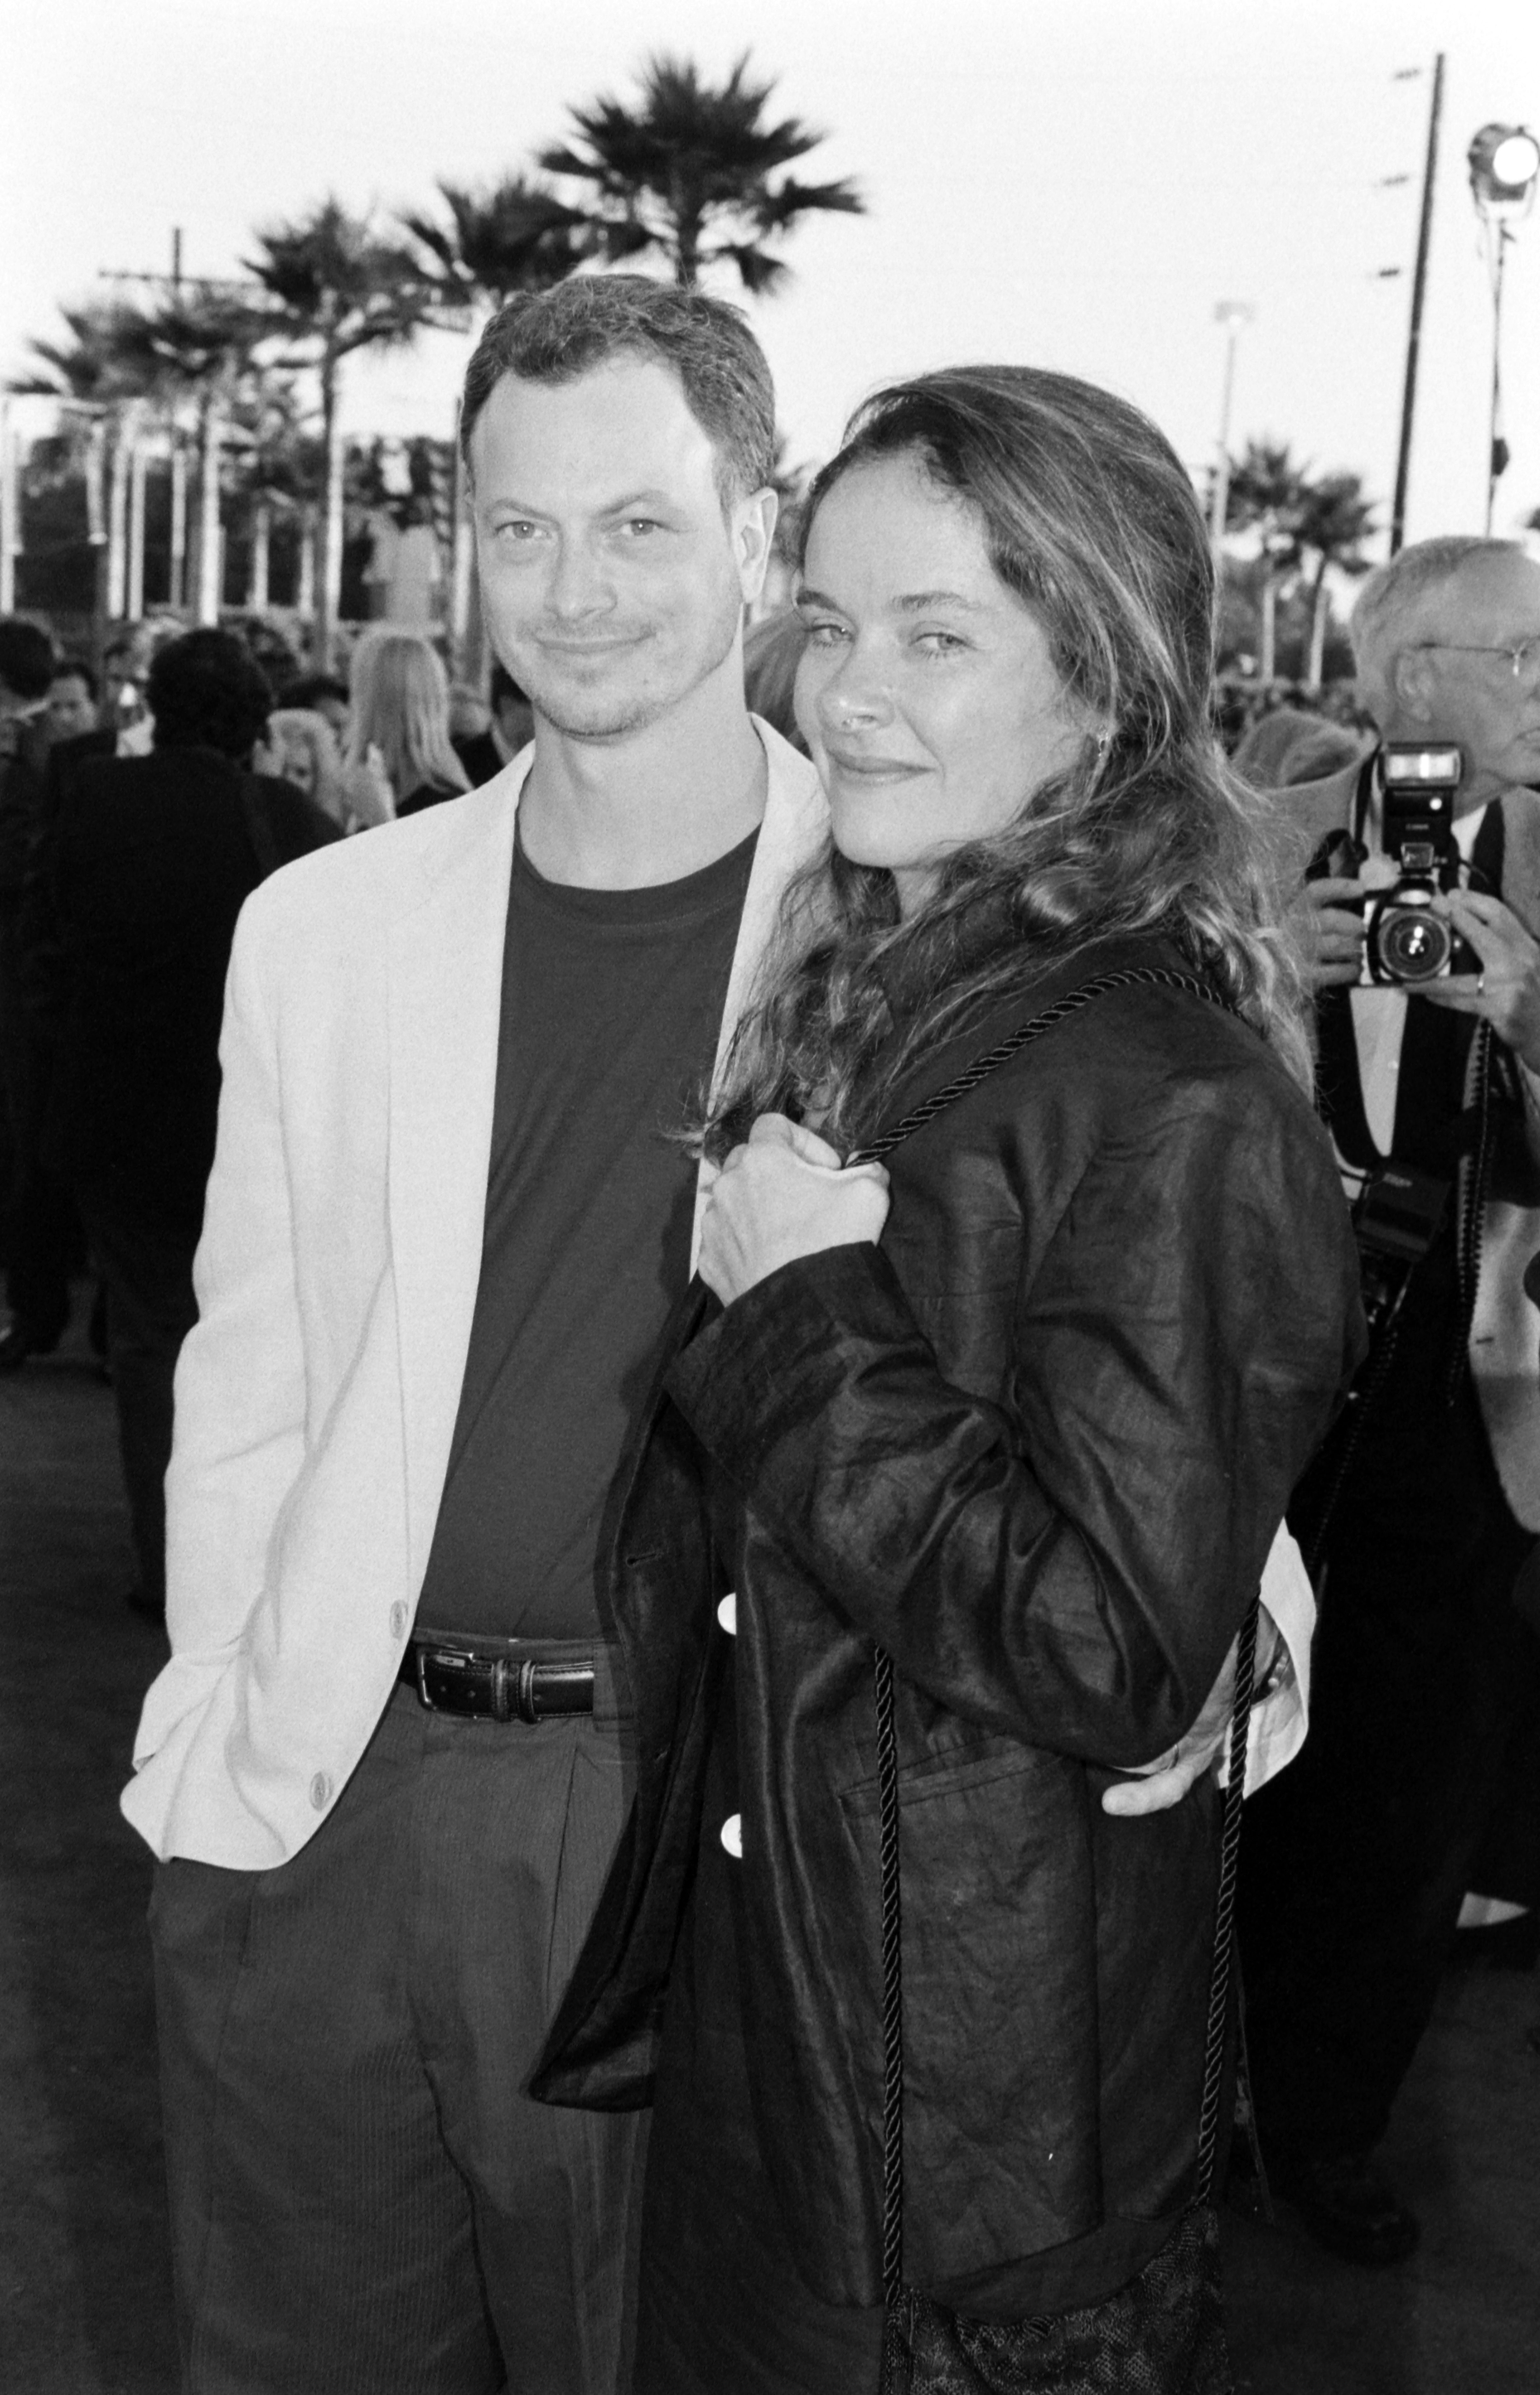 Gary Sinise and Moira Harris attending an event in Paramount Studios in Los Angeles on August 3, 1994 | Source: Getty Images